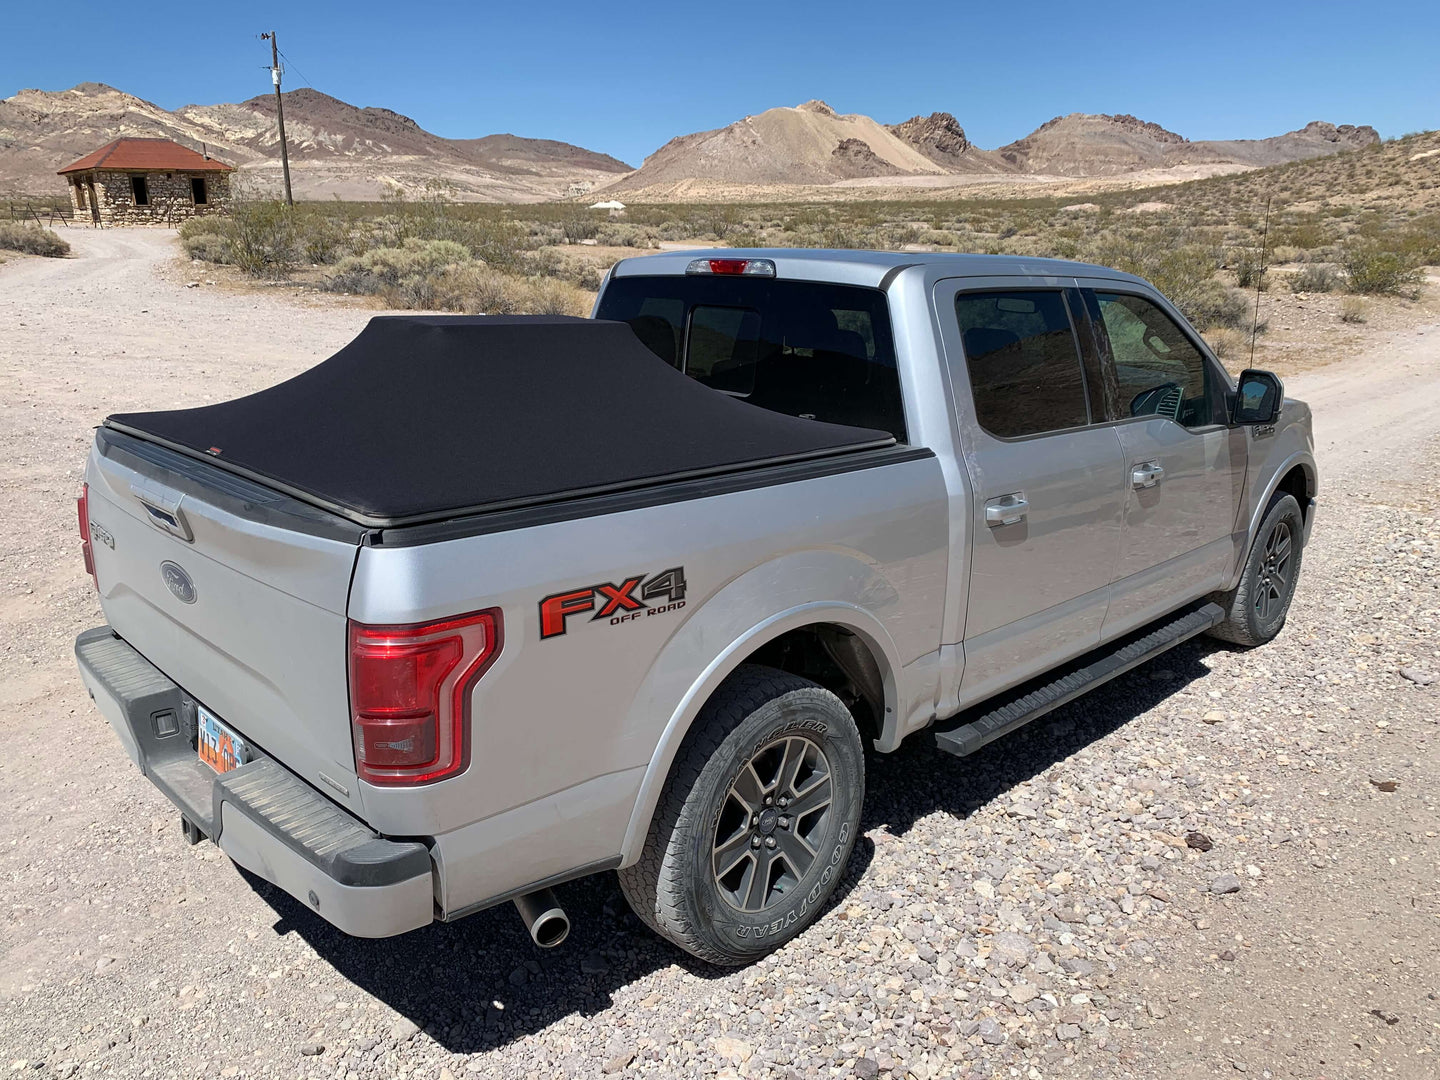 Silver Ford F-150 with expanded sawtooth strtch truck bed cover in Ryolite Nevada